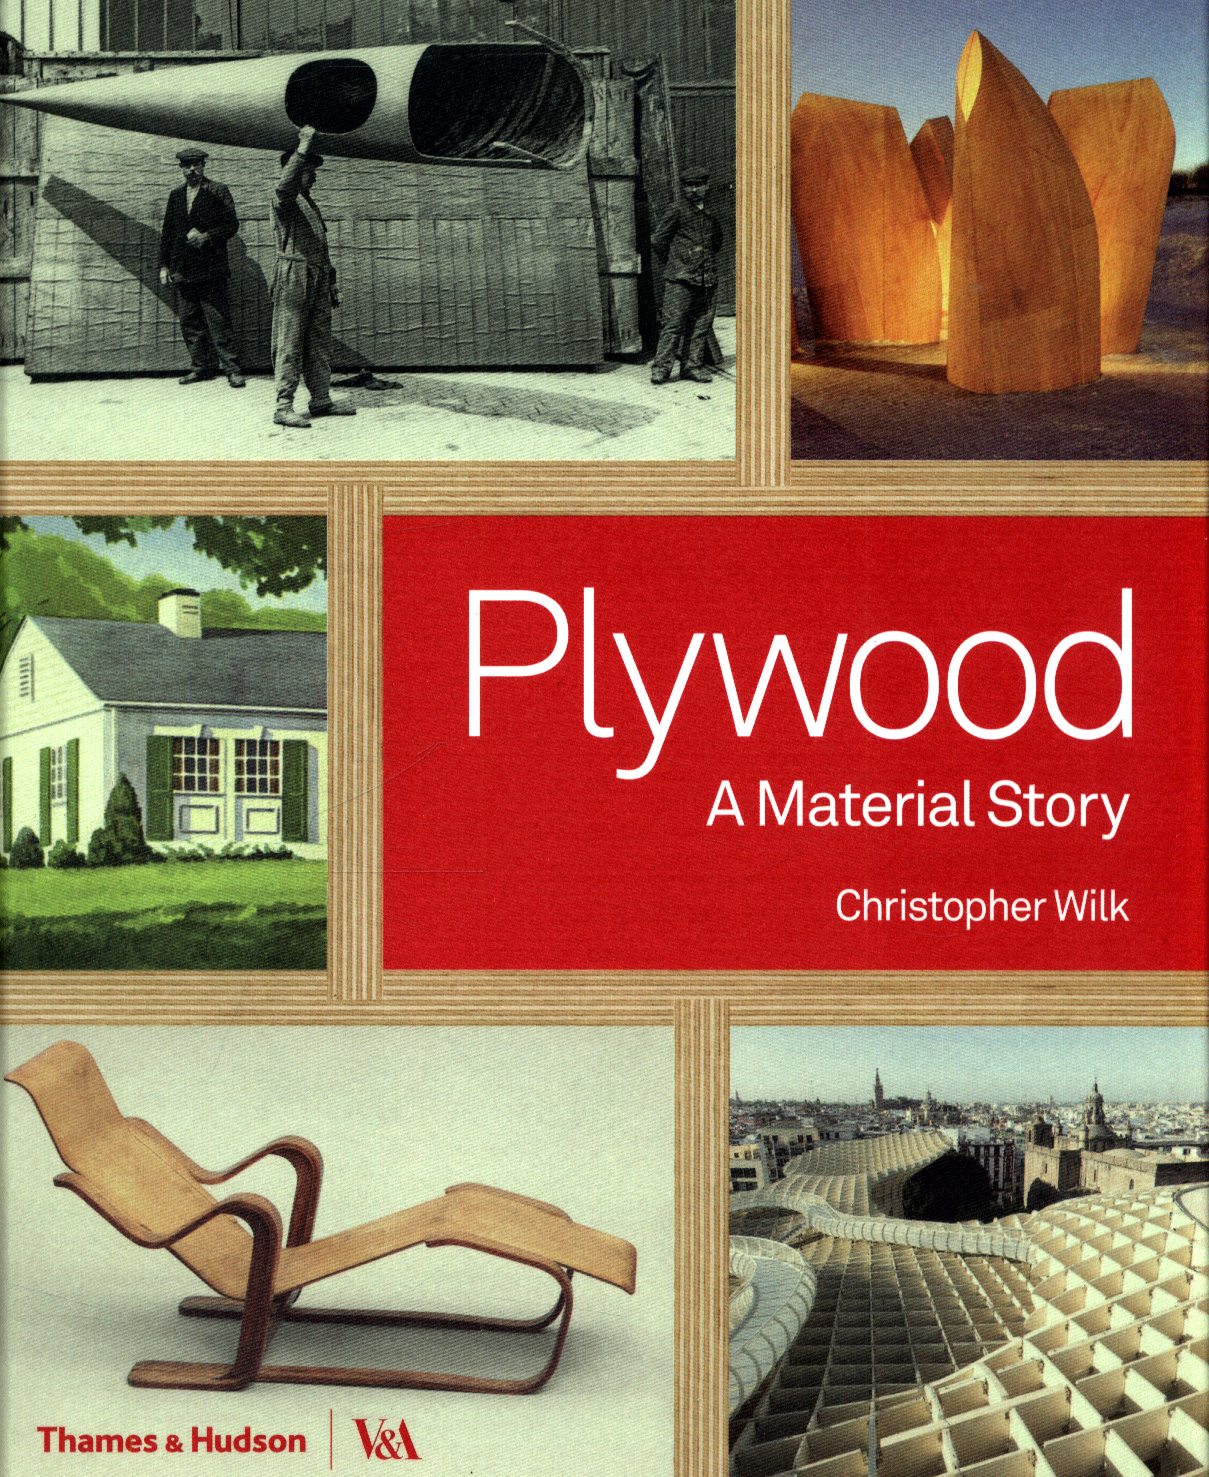 Plywood: A Material Story